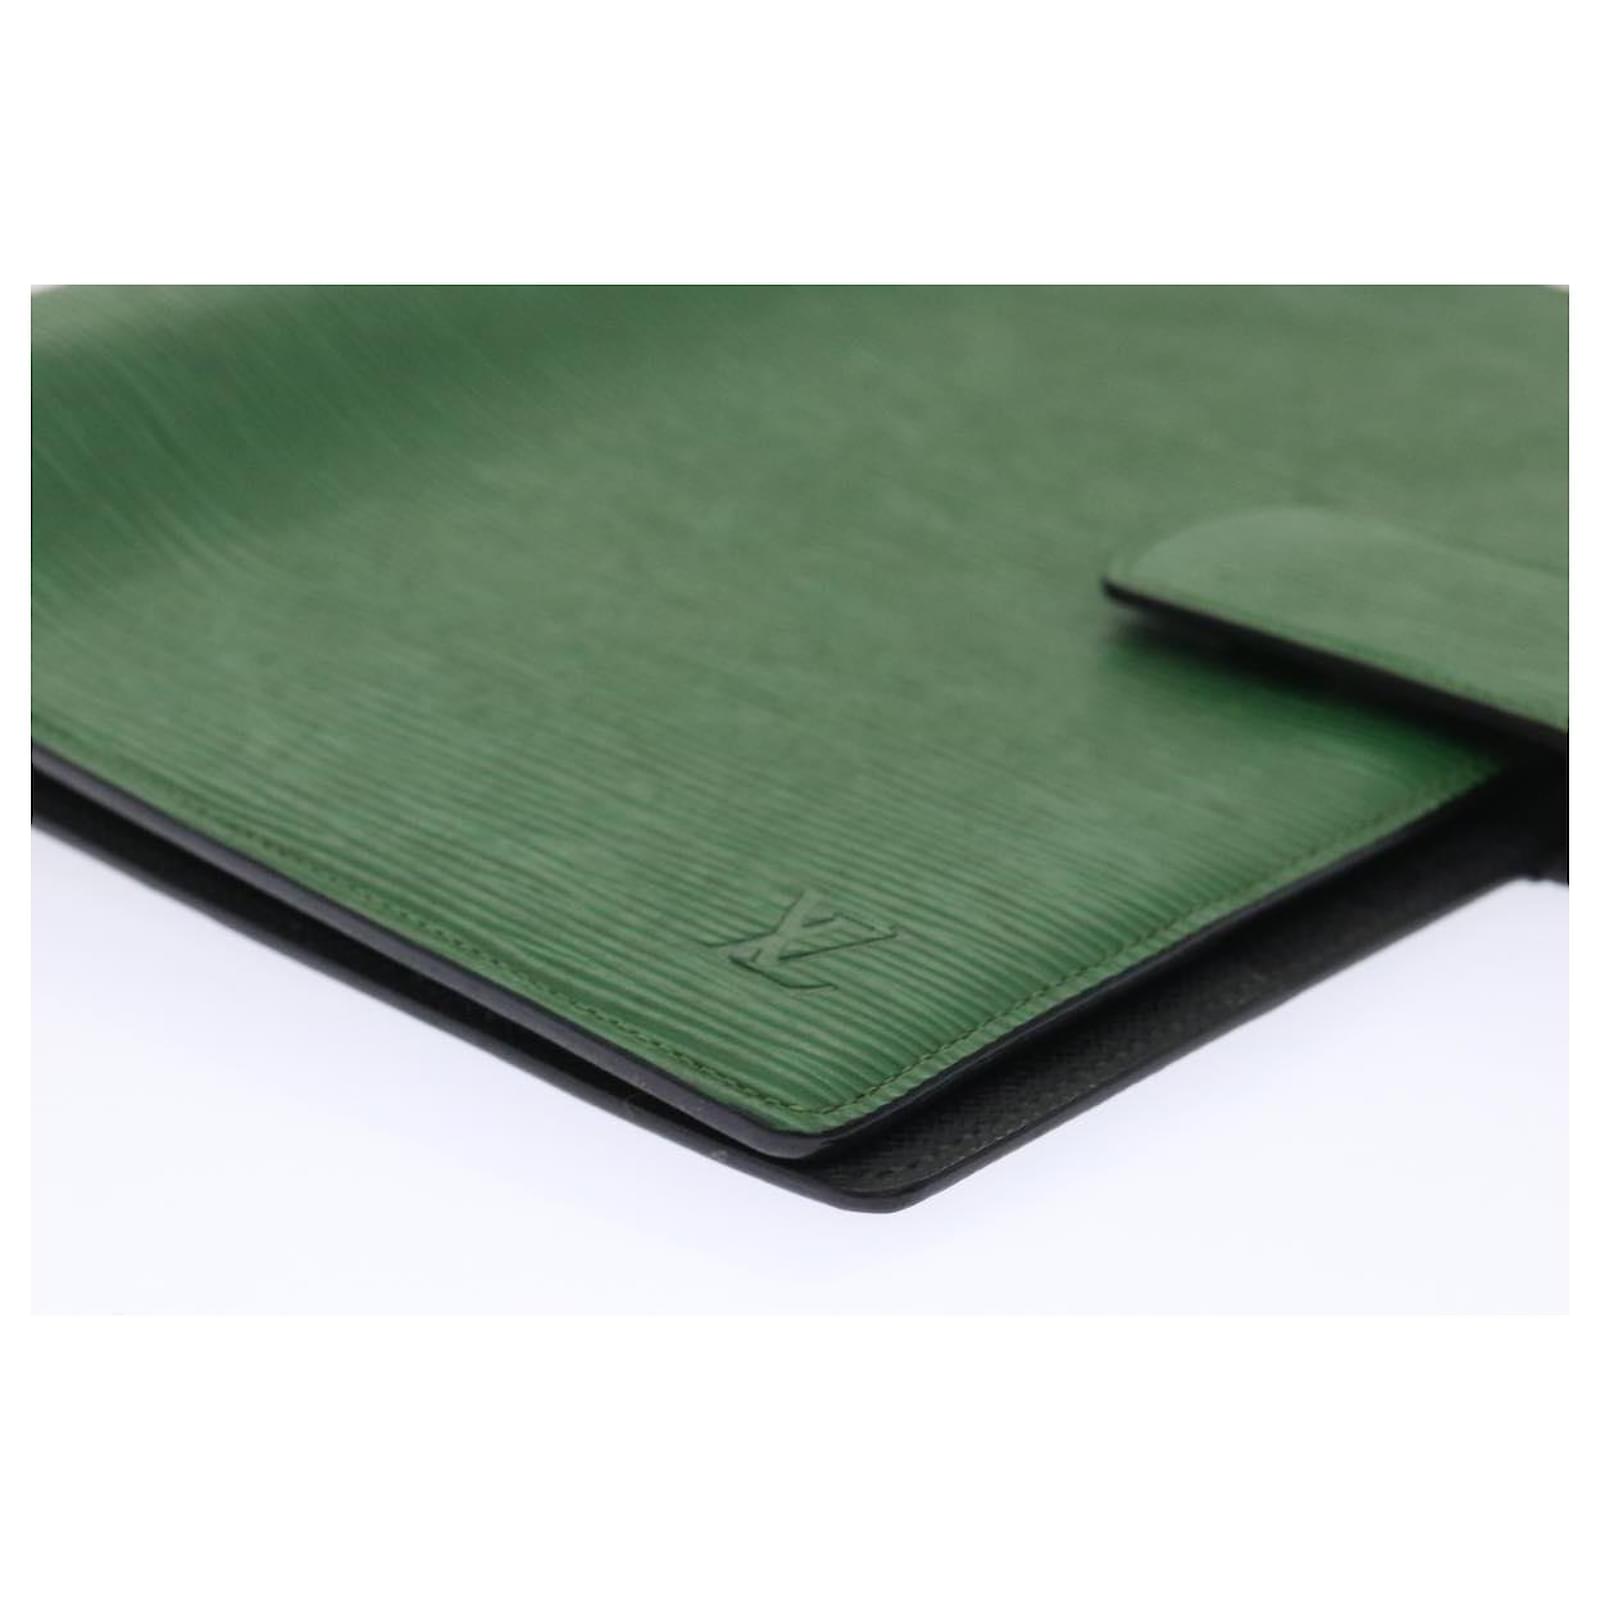 LOUIS VUITTON Epi Agenda GM Day Planner Cover Green LV Auth 47745